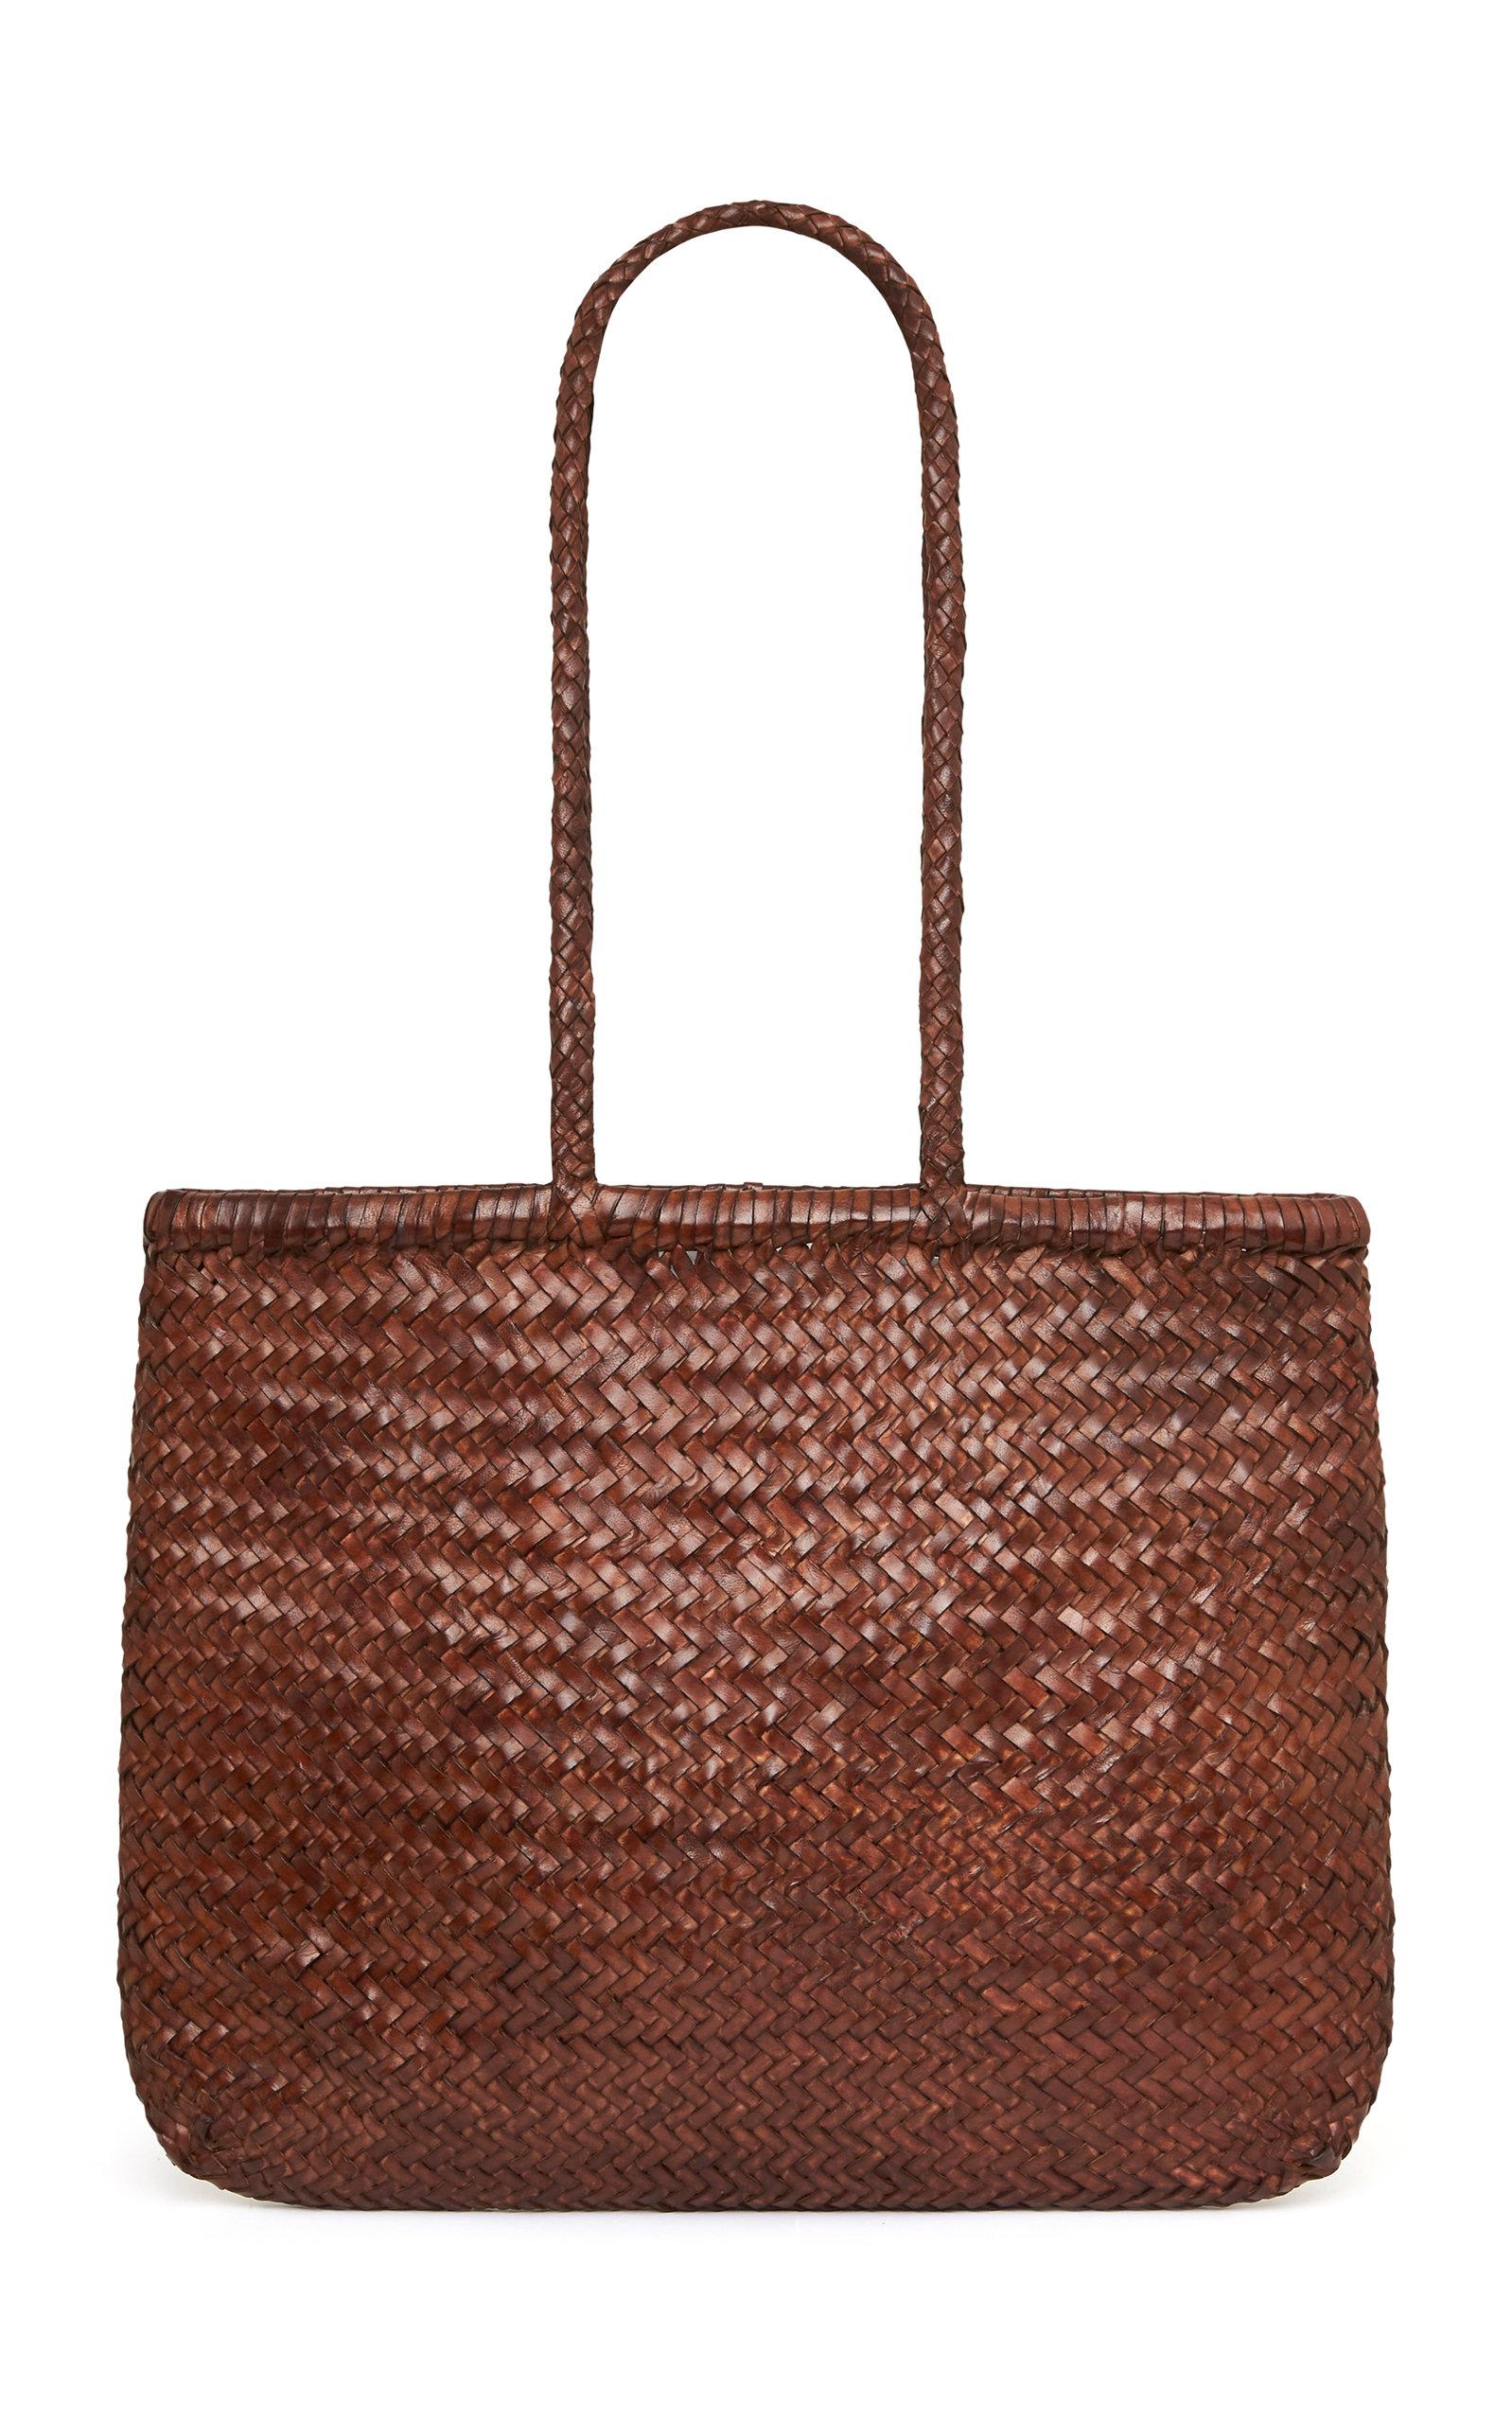 St. Agni Bagu Woven Leather Tote in Brown | Lyst UK